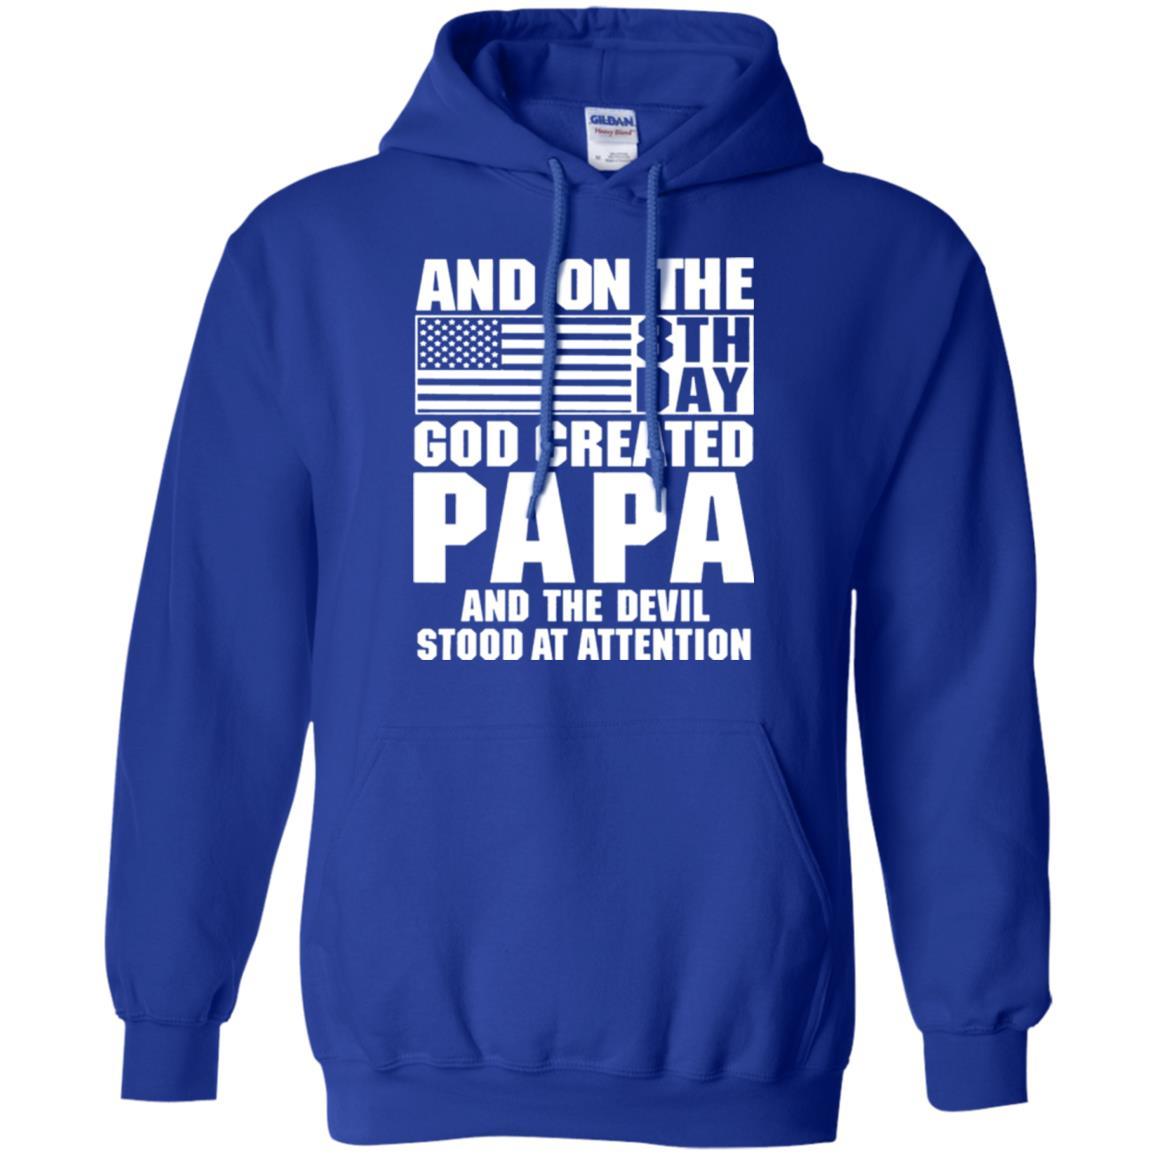 Papa T-shirt And On The 8th Day God Creadted Papa